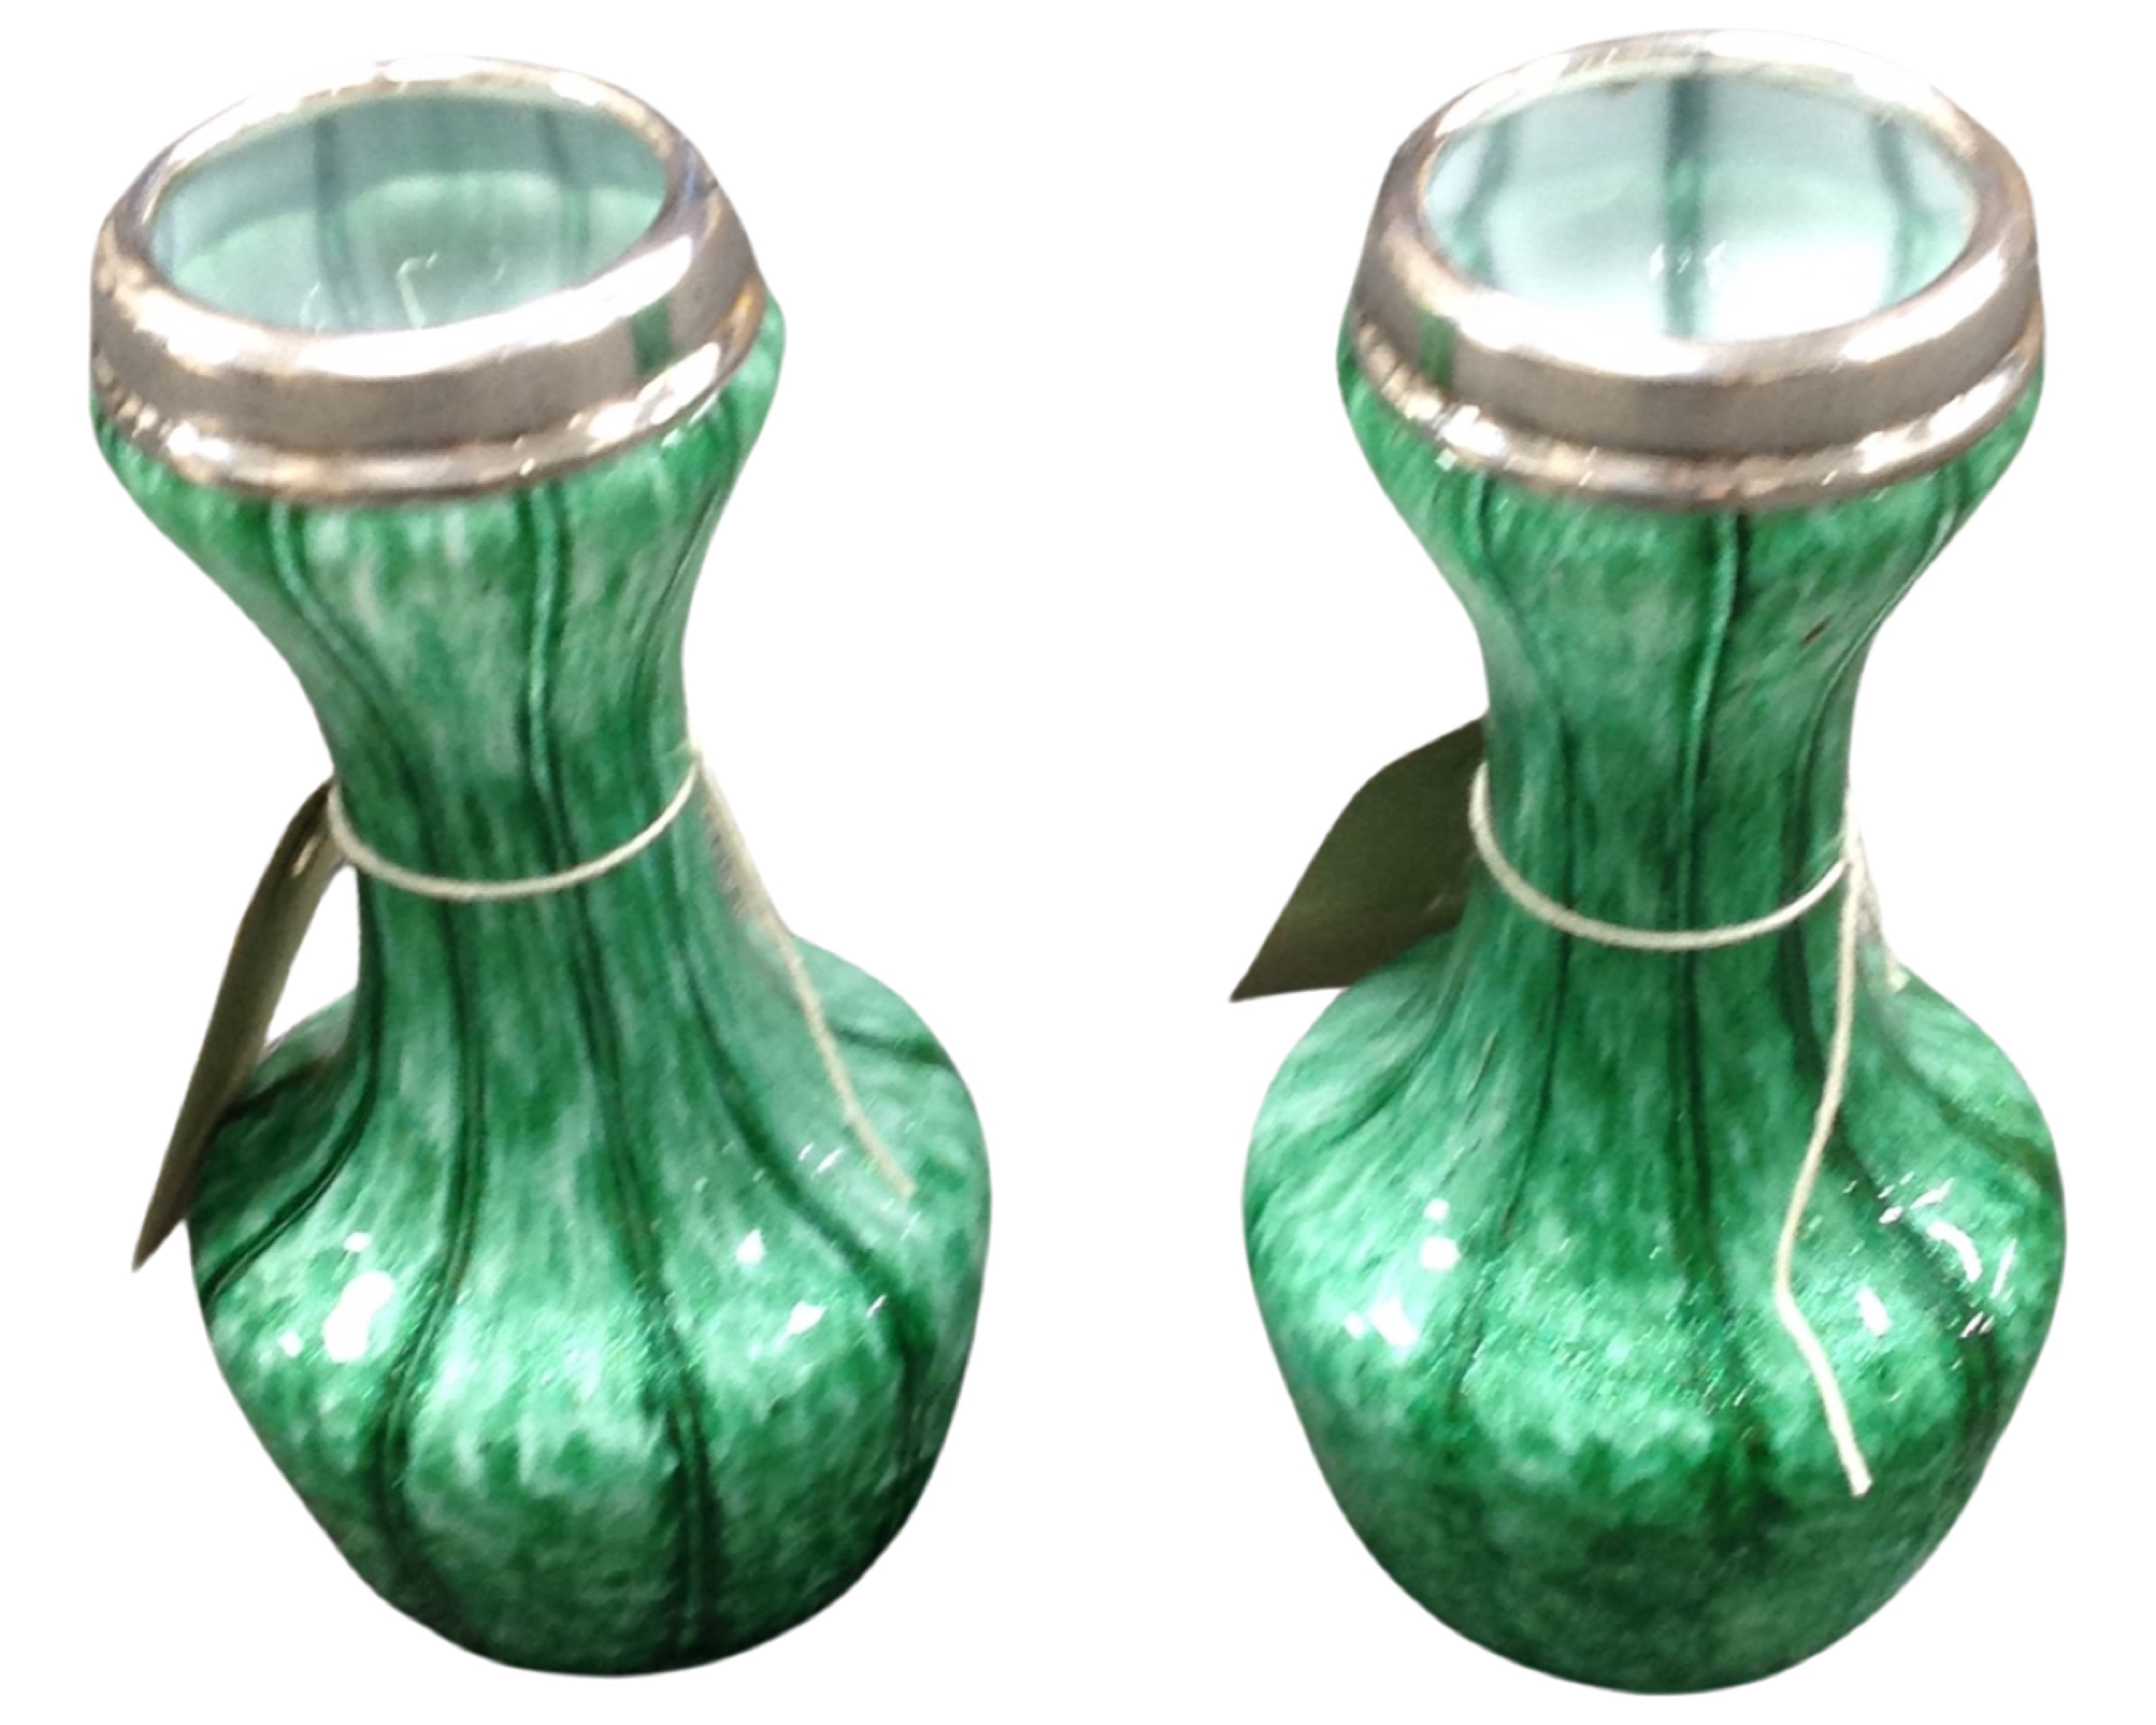 A pair of Art Deco silver-rimmed green glass vases, London marks, 1928, height 16 cm.